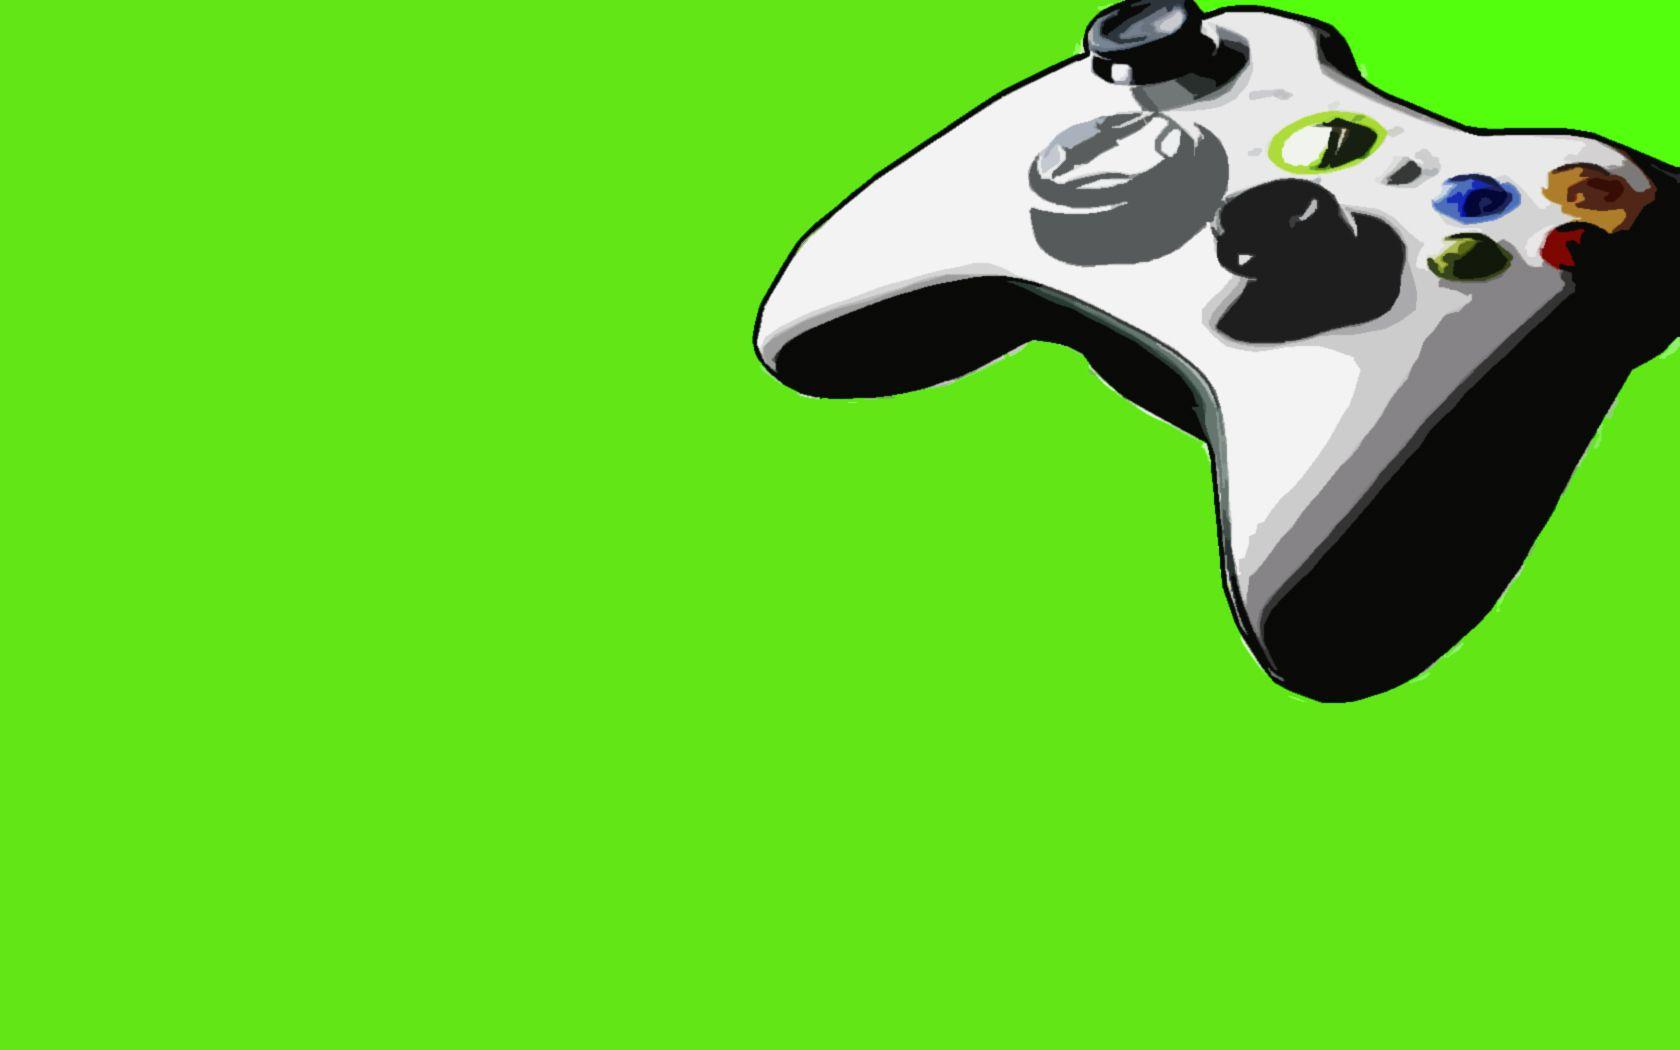 green, video games, Xbox, controllers, Xbox simple background